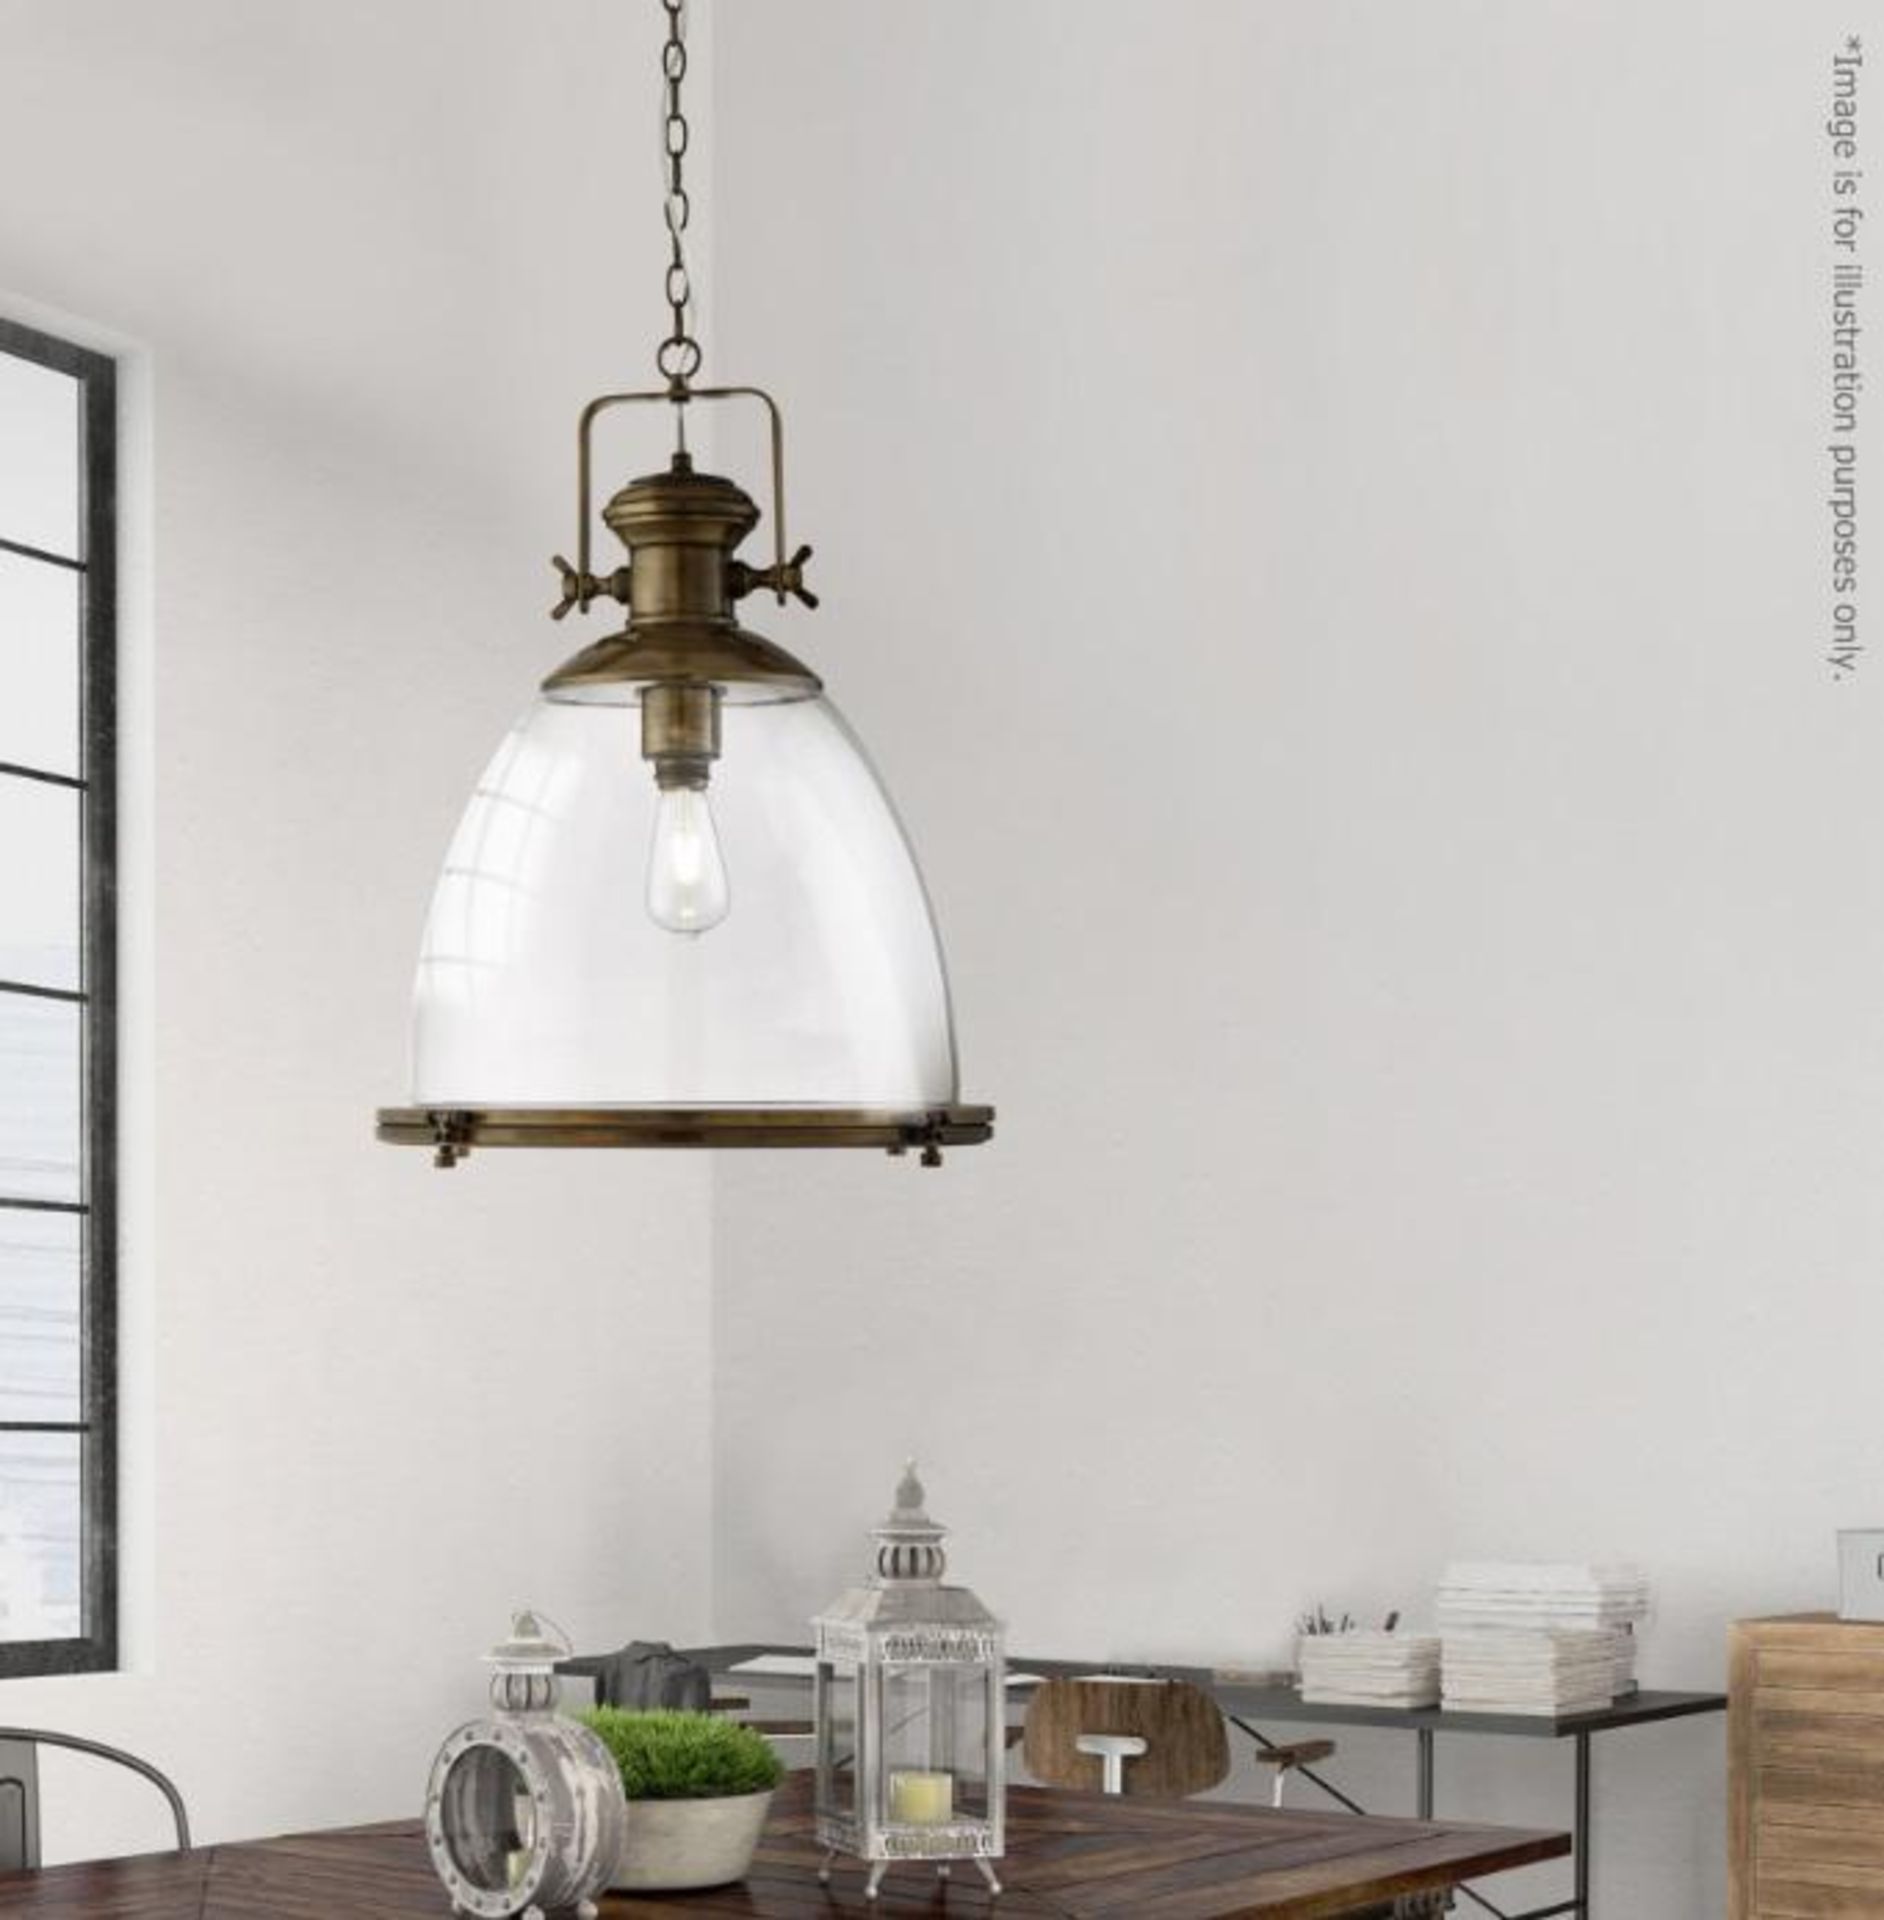 1 x Large 1-Light Industrial Pendant With A Painted Antique Brass Finish, With Clear Glass